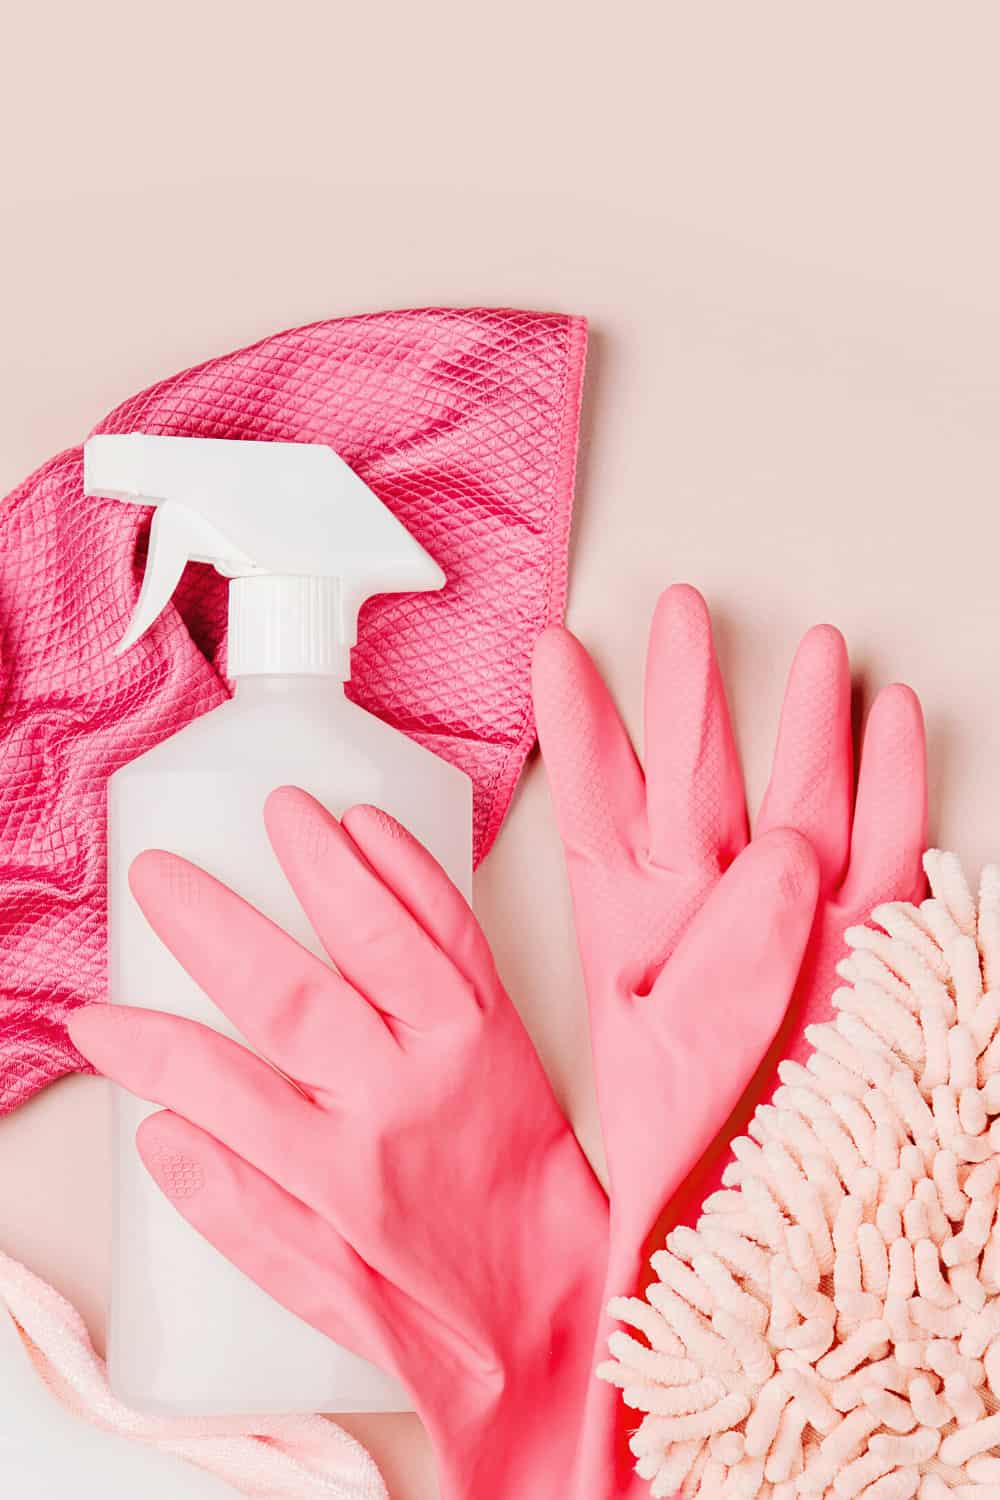 End Of Summer Cleaning Checklist With These 7 Helpful Tips!